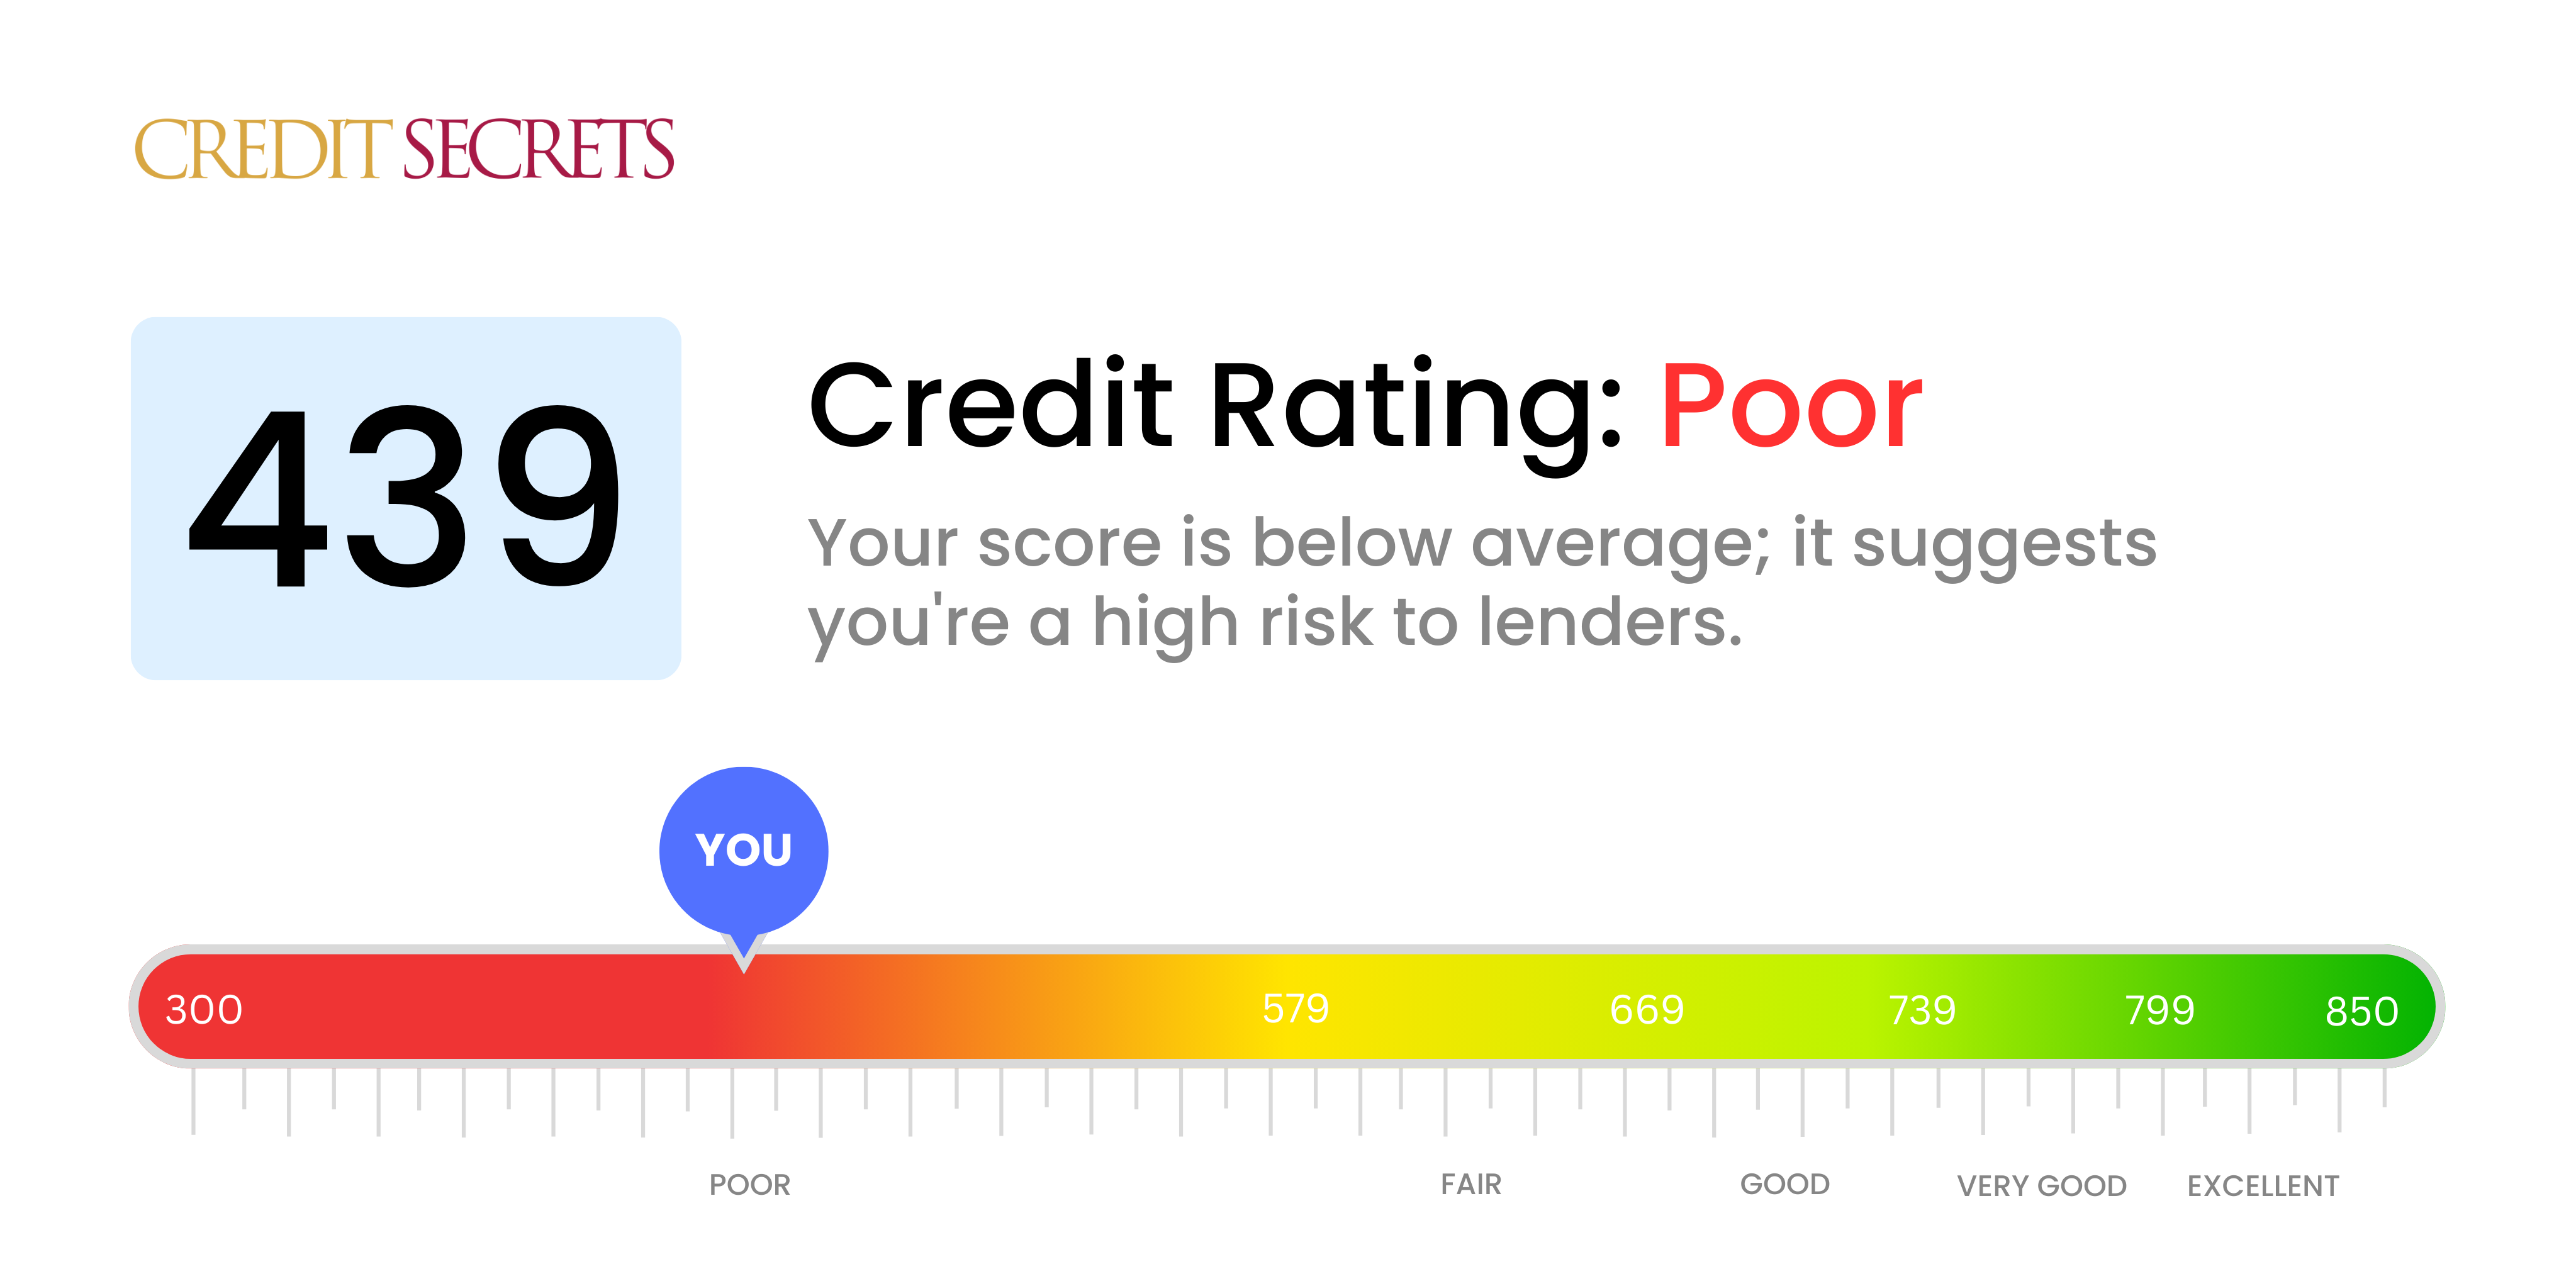 Is 439 a good credit score?